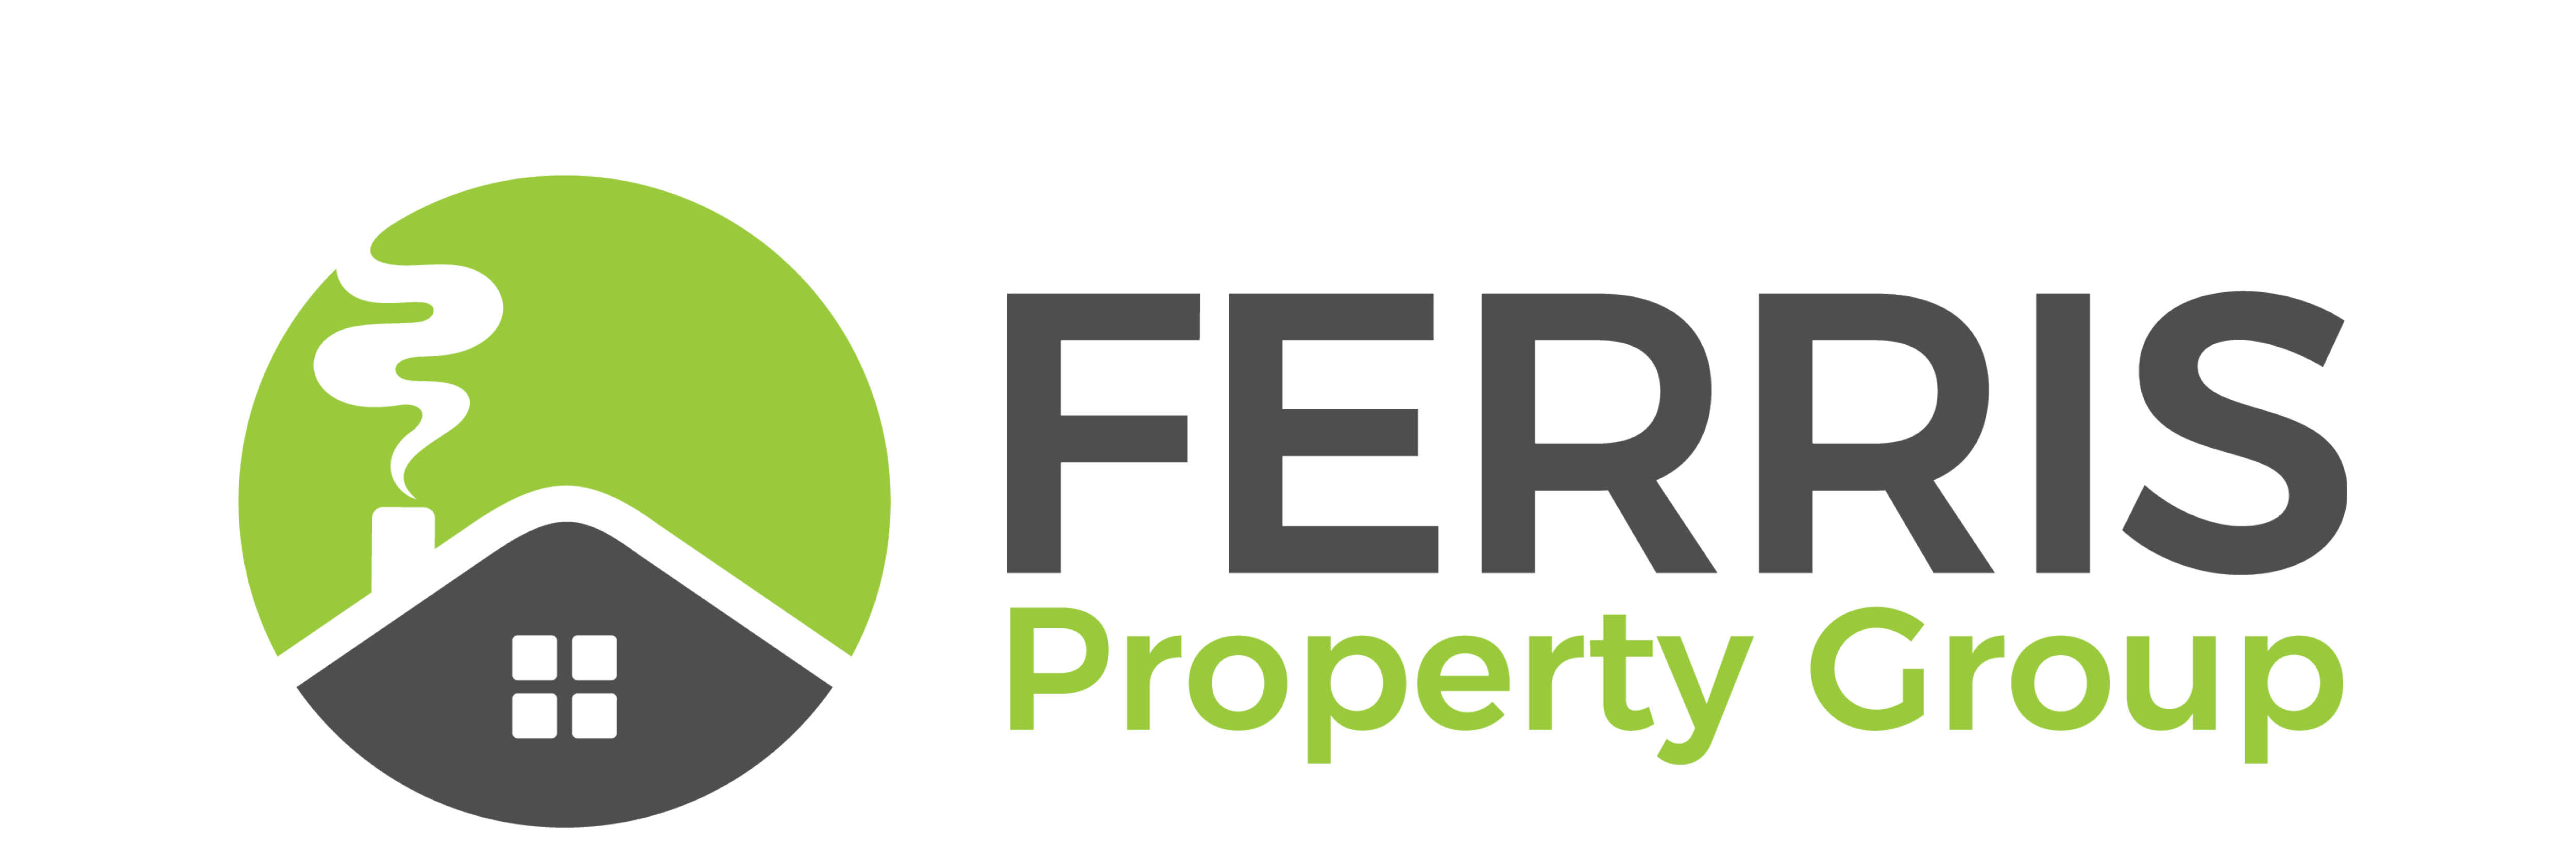 The Ferris Property Group